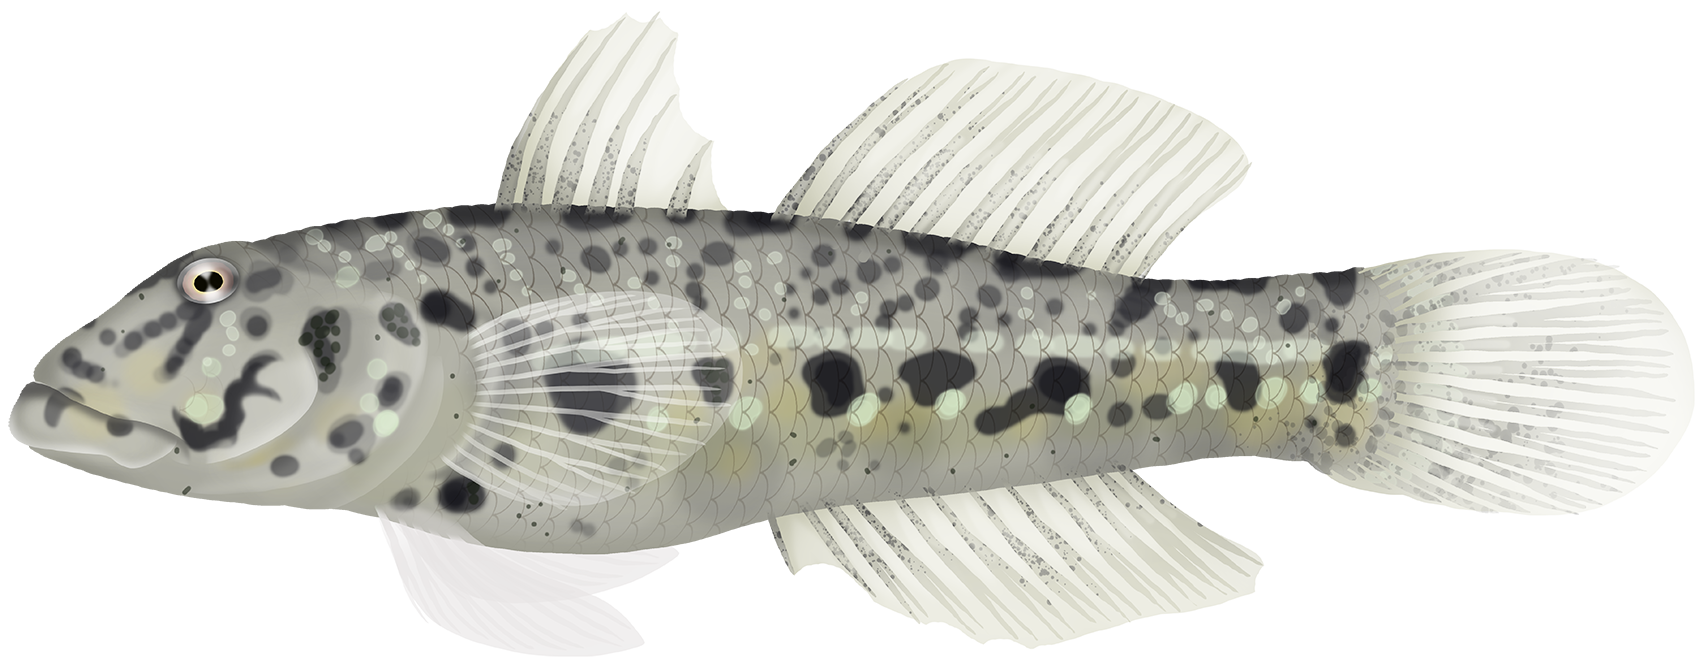 Ocellated River Goby - Marinewise